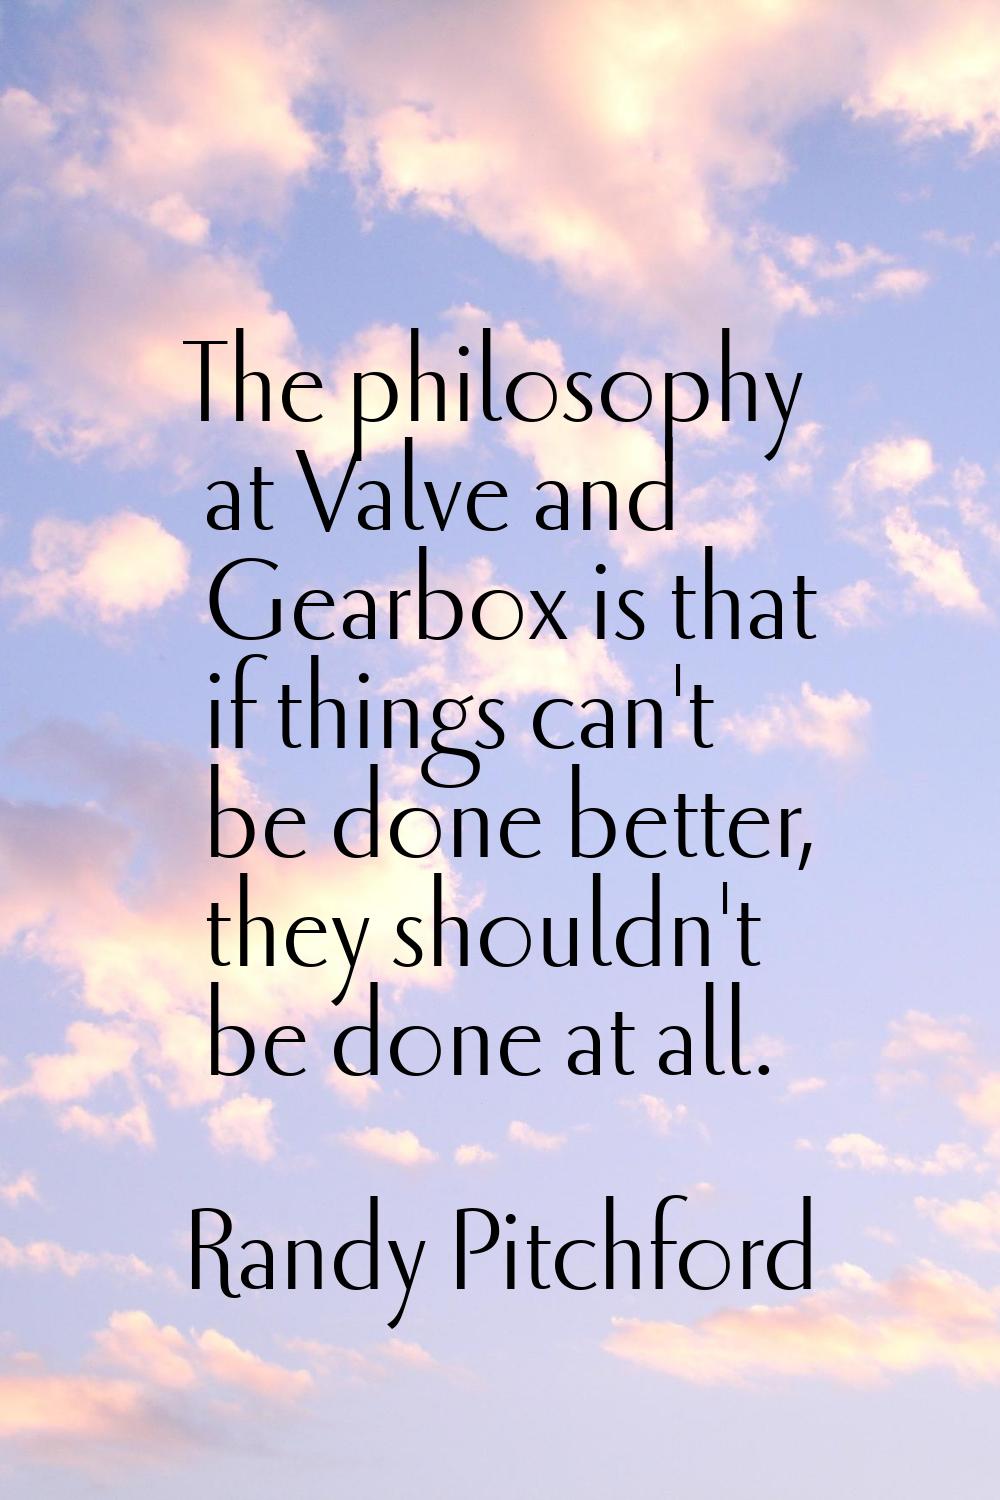 The philosophy at Valve and Gearbox is that if things can't be done better, they shouldn't be done 